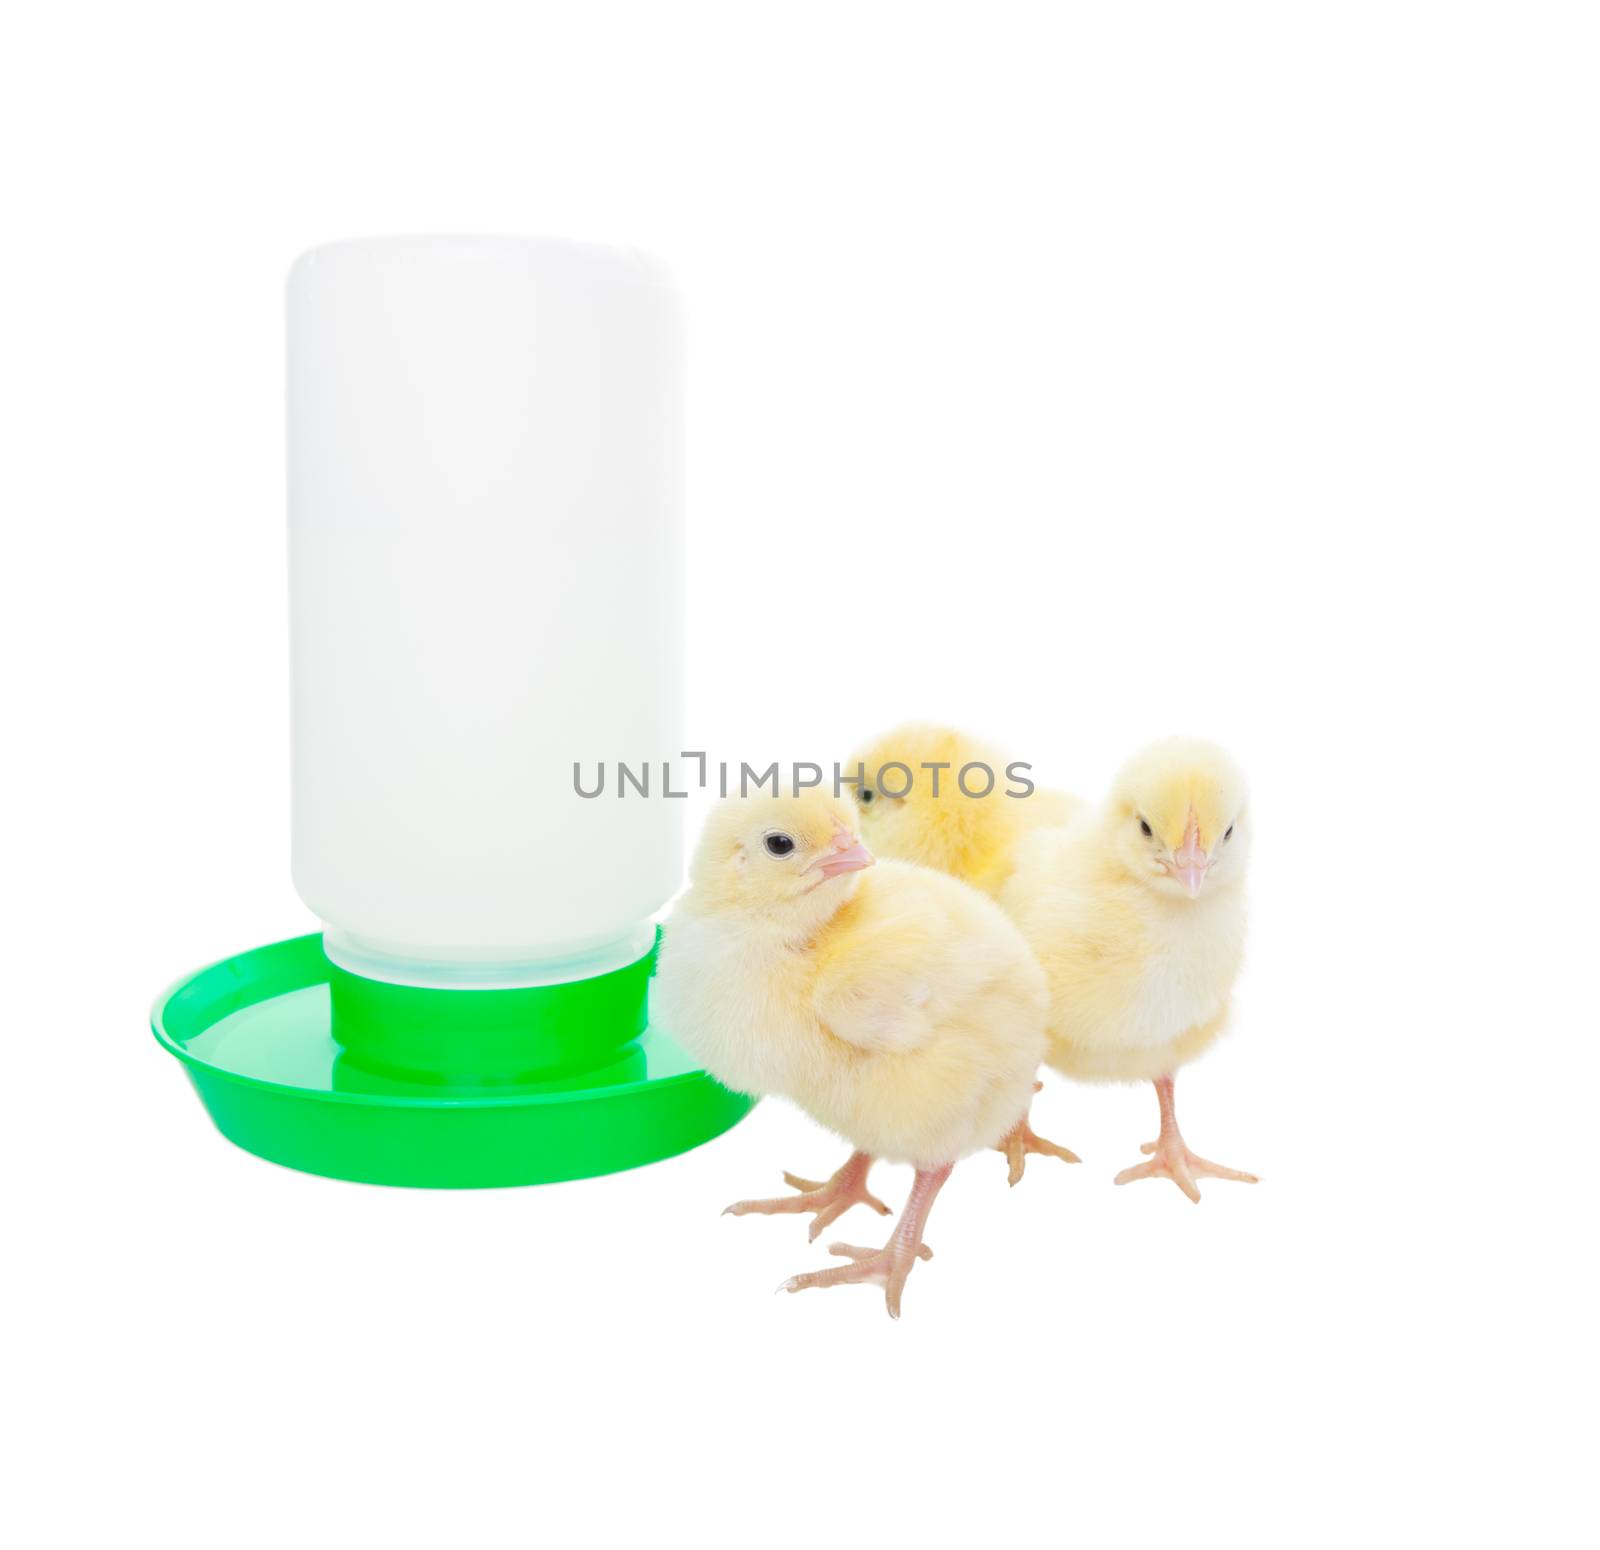 Newborn chicks near an automatic watering container.  Shot on white background.